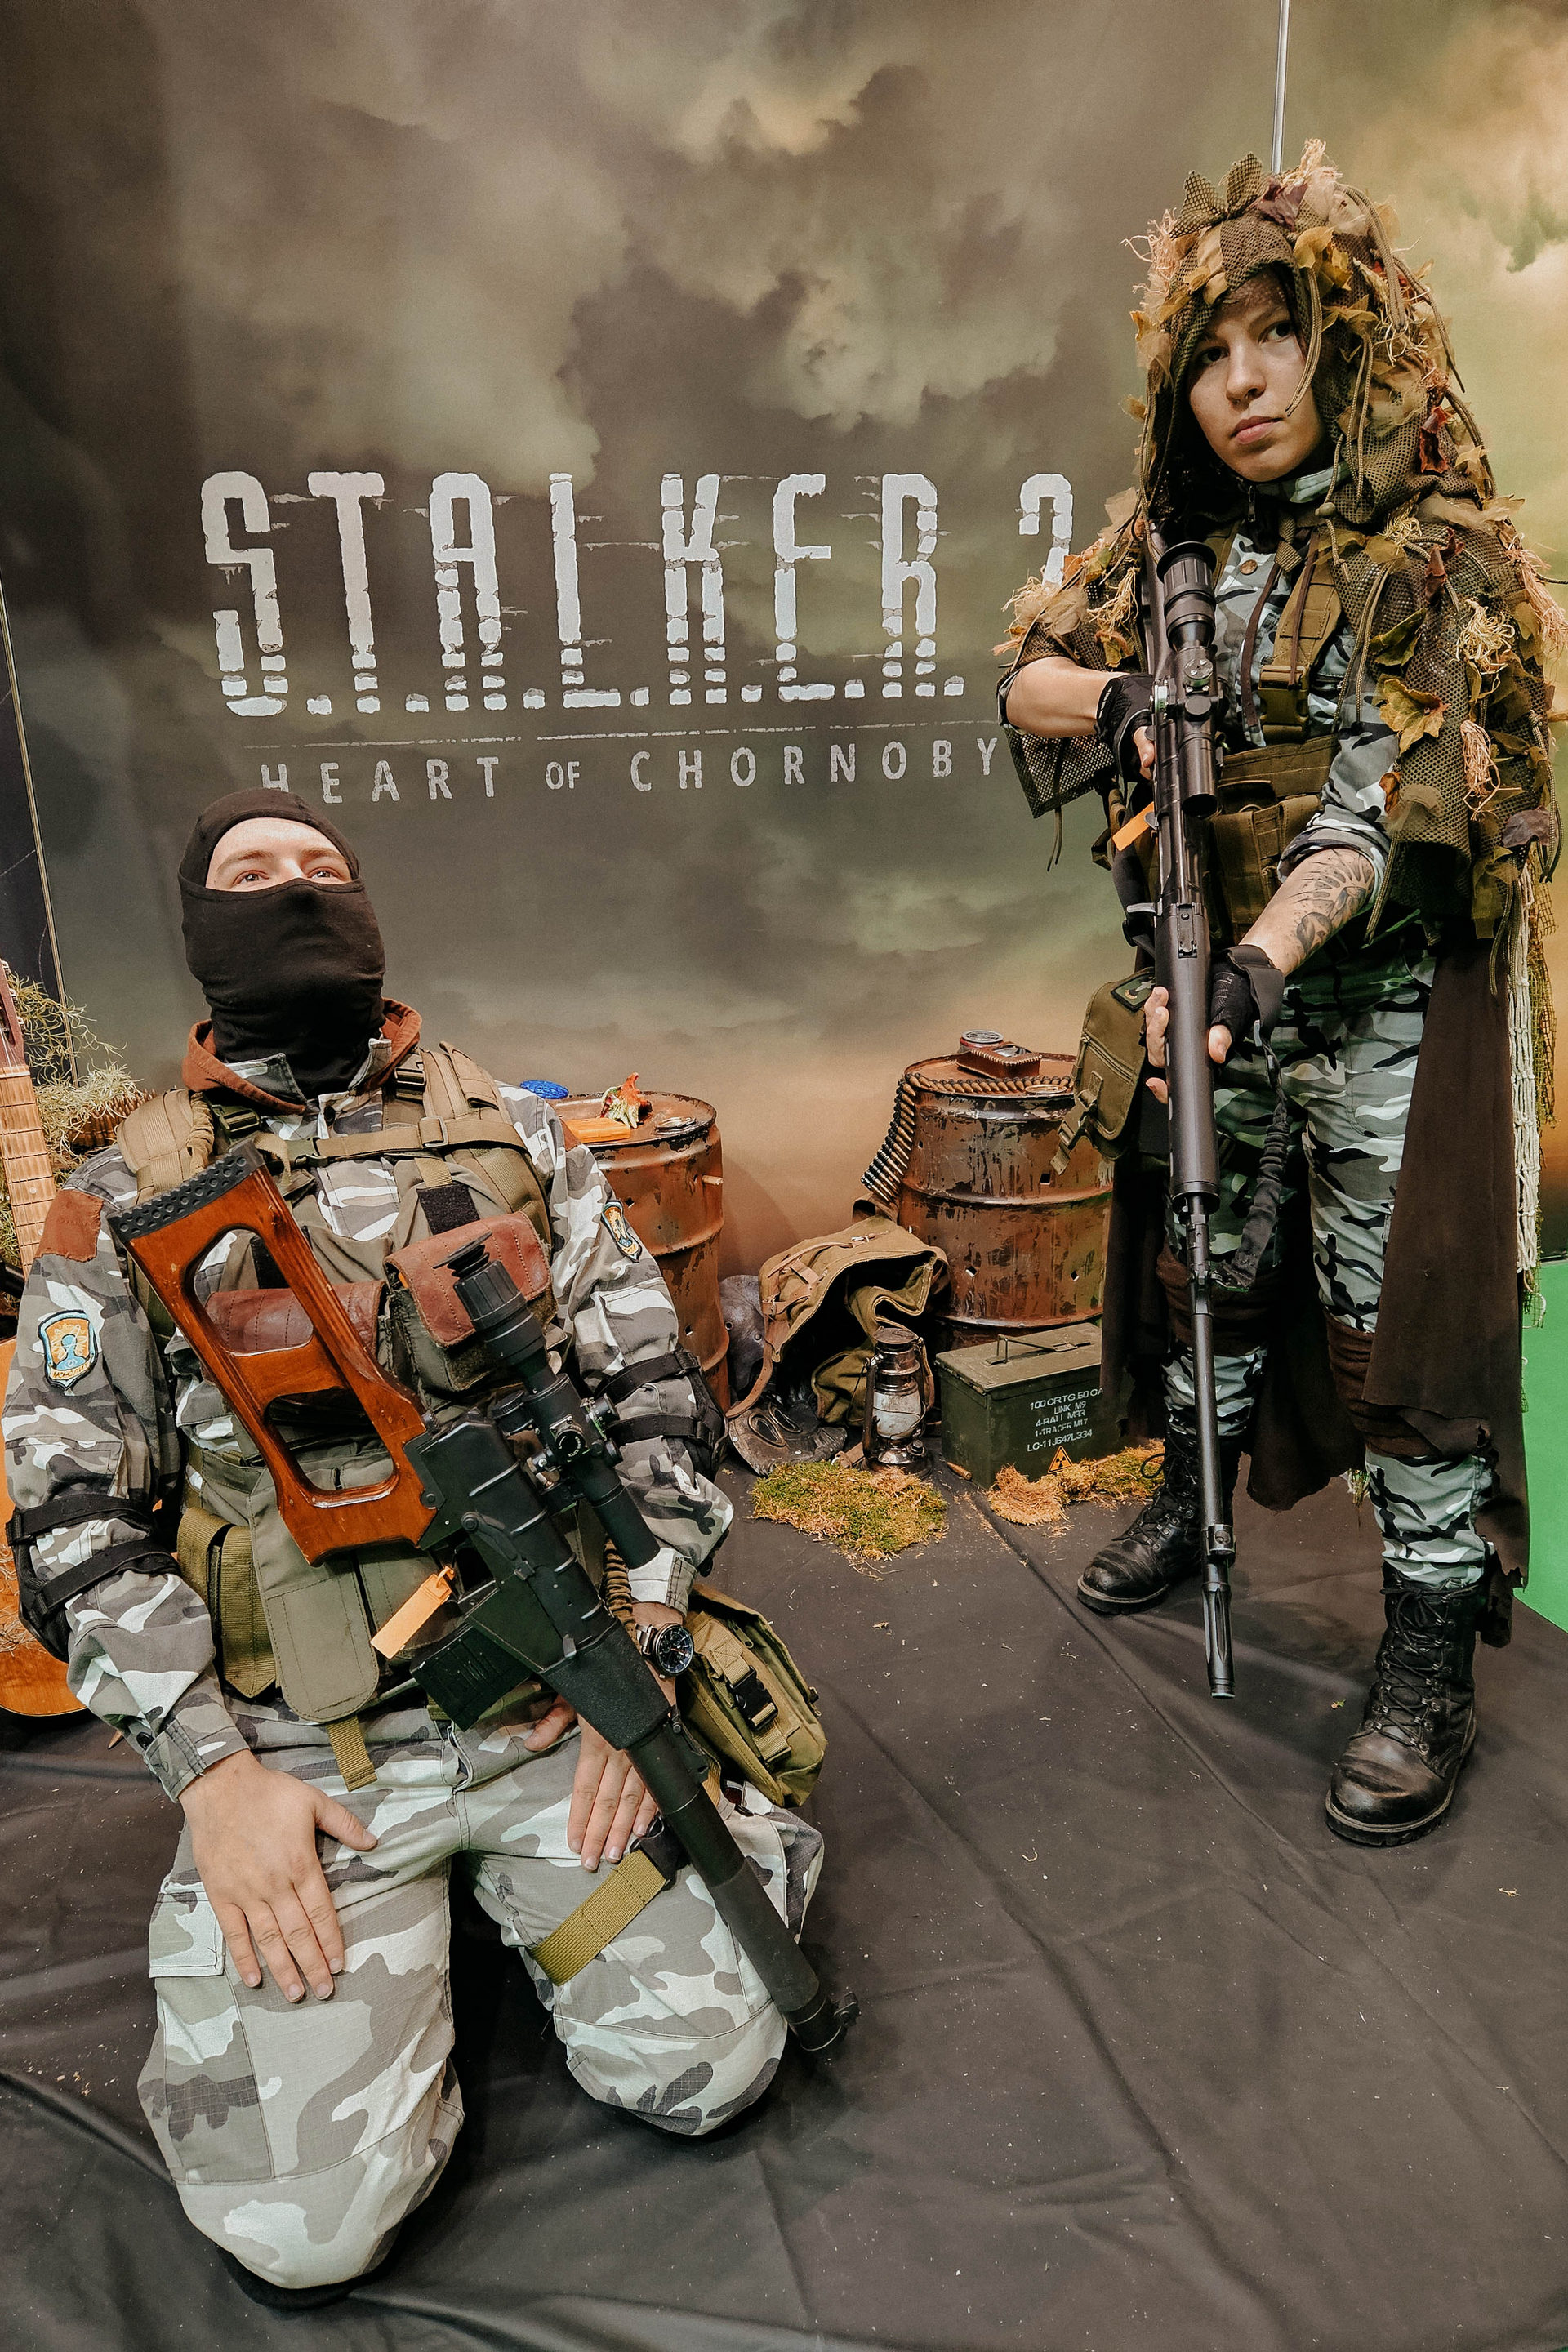 Fresh screenshots of S.T.A.L.K.E.R. 2 have been released. Gaming news -  eSports events review, analytics, announcements, interviews, statistics -  ta4CAlq79